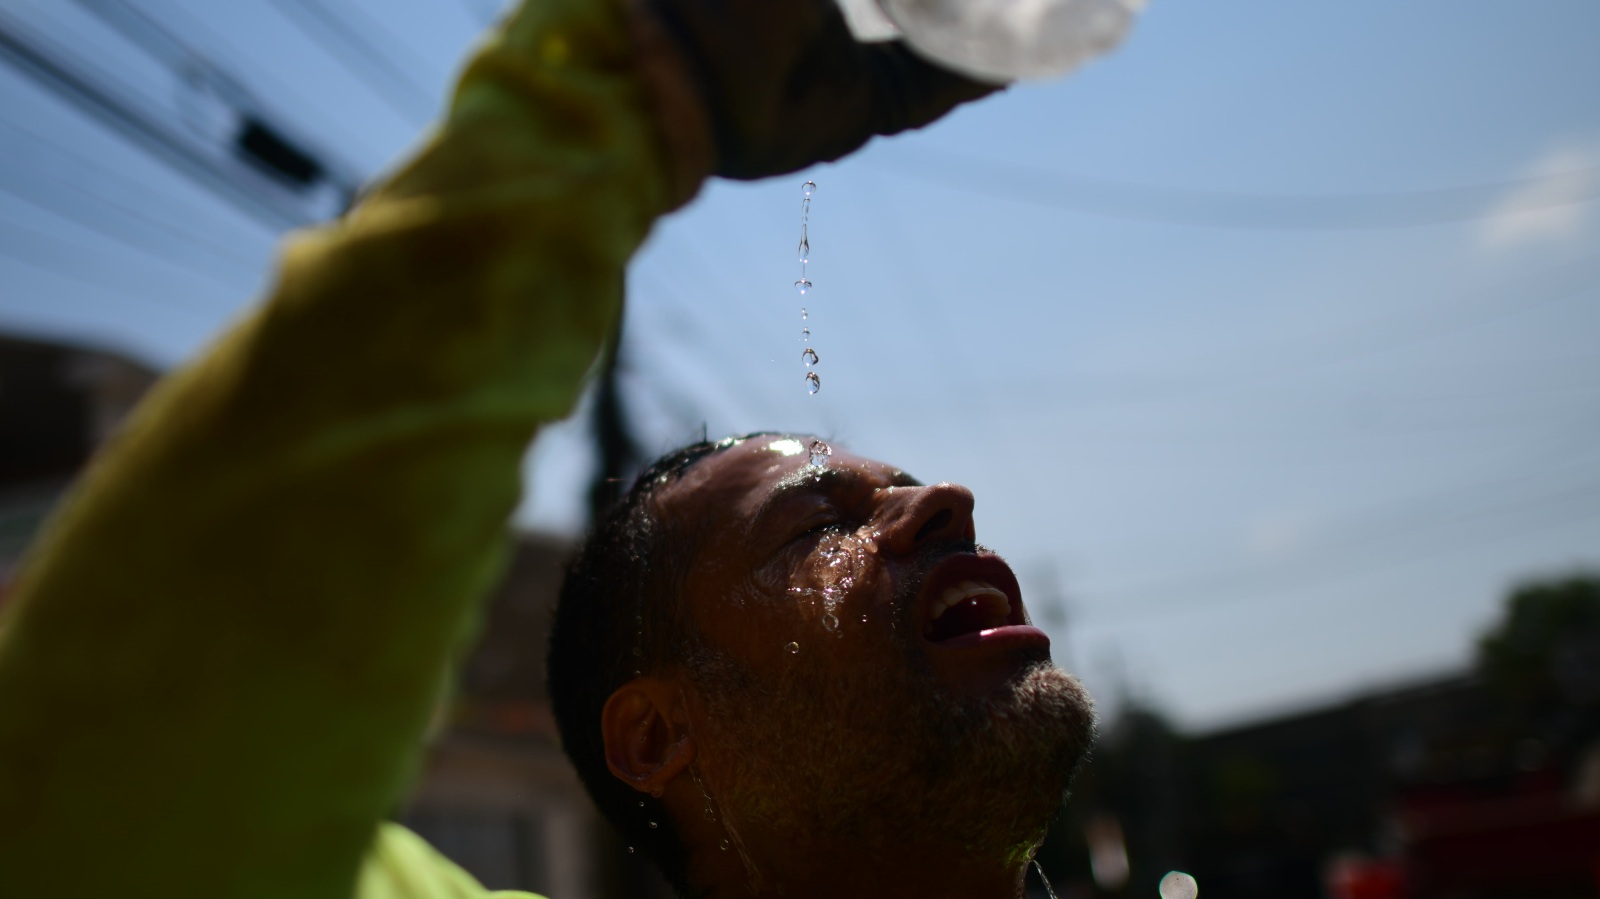 A man pours water on his face in the hot sun